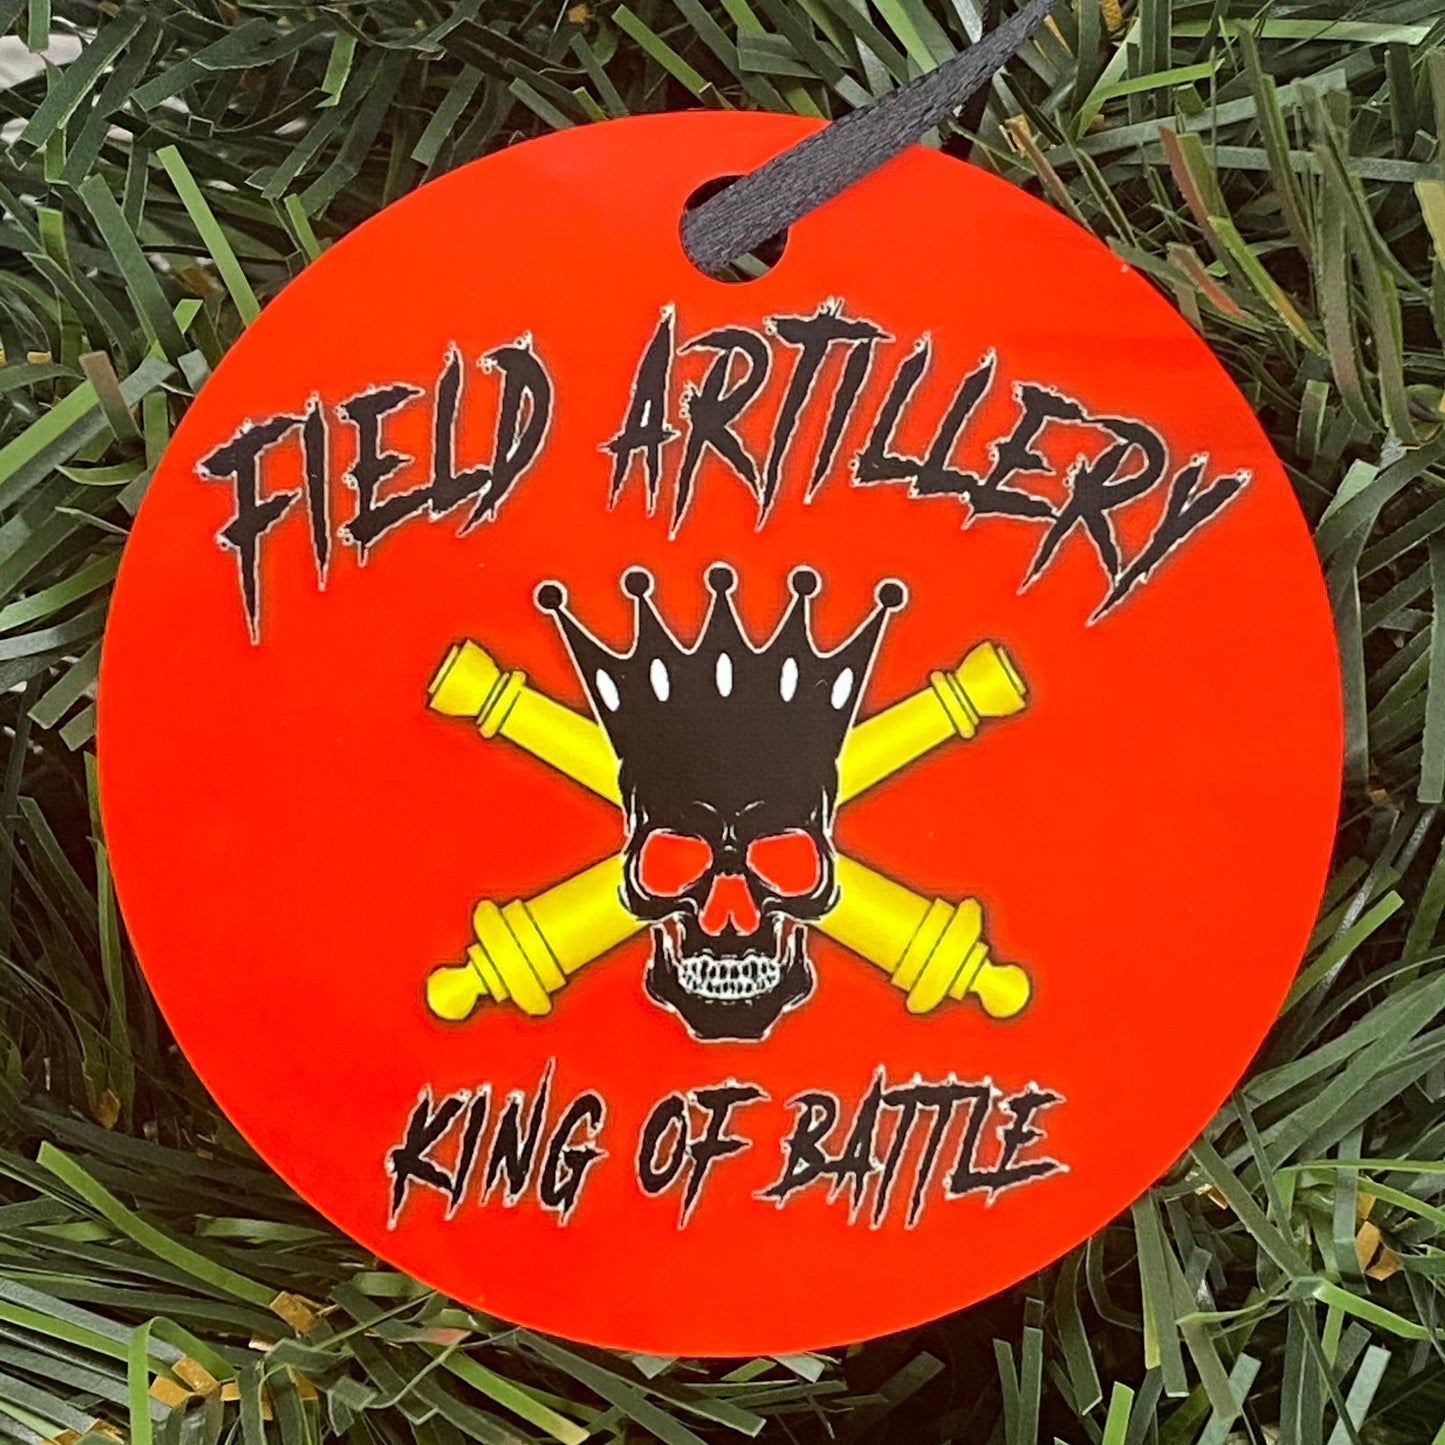 Field Artillery King of Battle | Christmas Ornament | Military